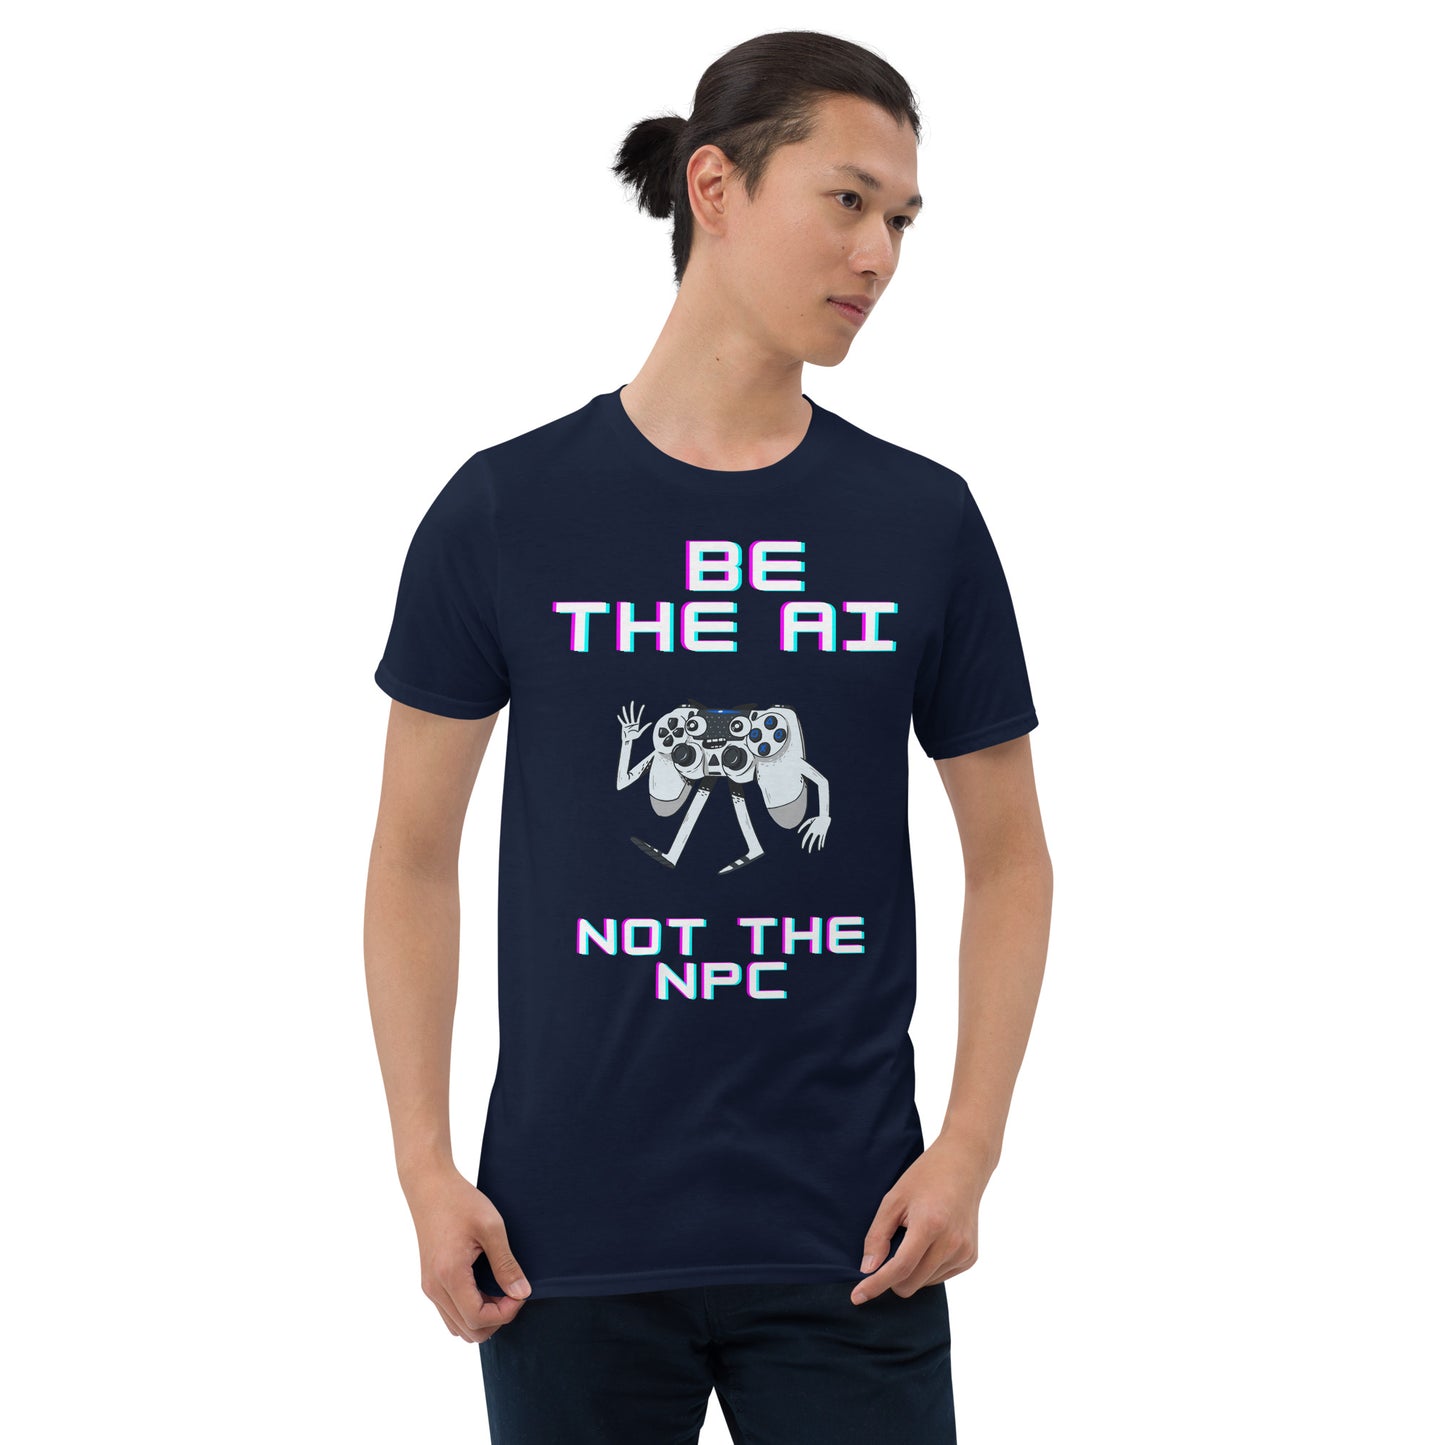 Man in navy short-sleeve t-shirt that says be the AI not the NPC